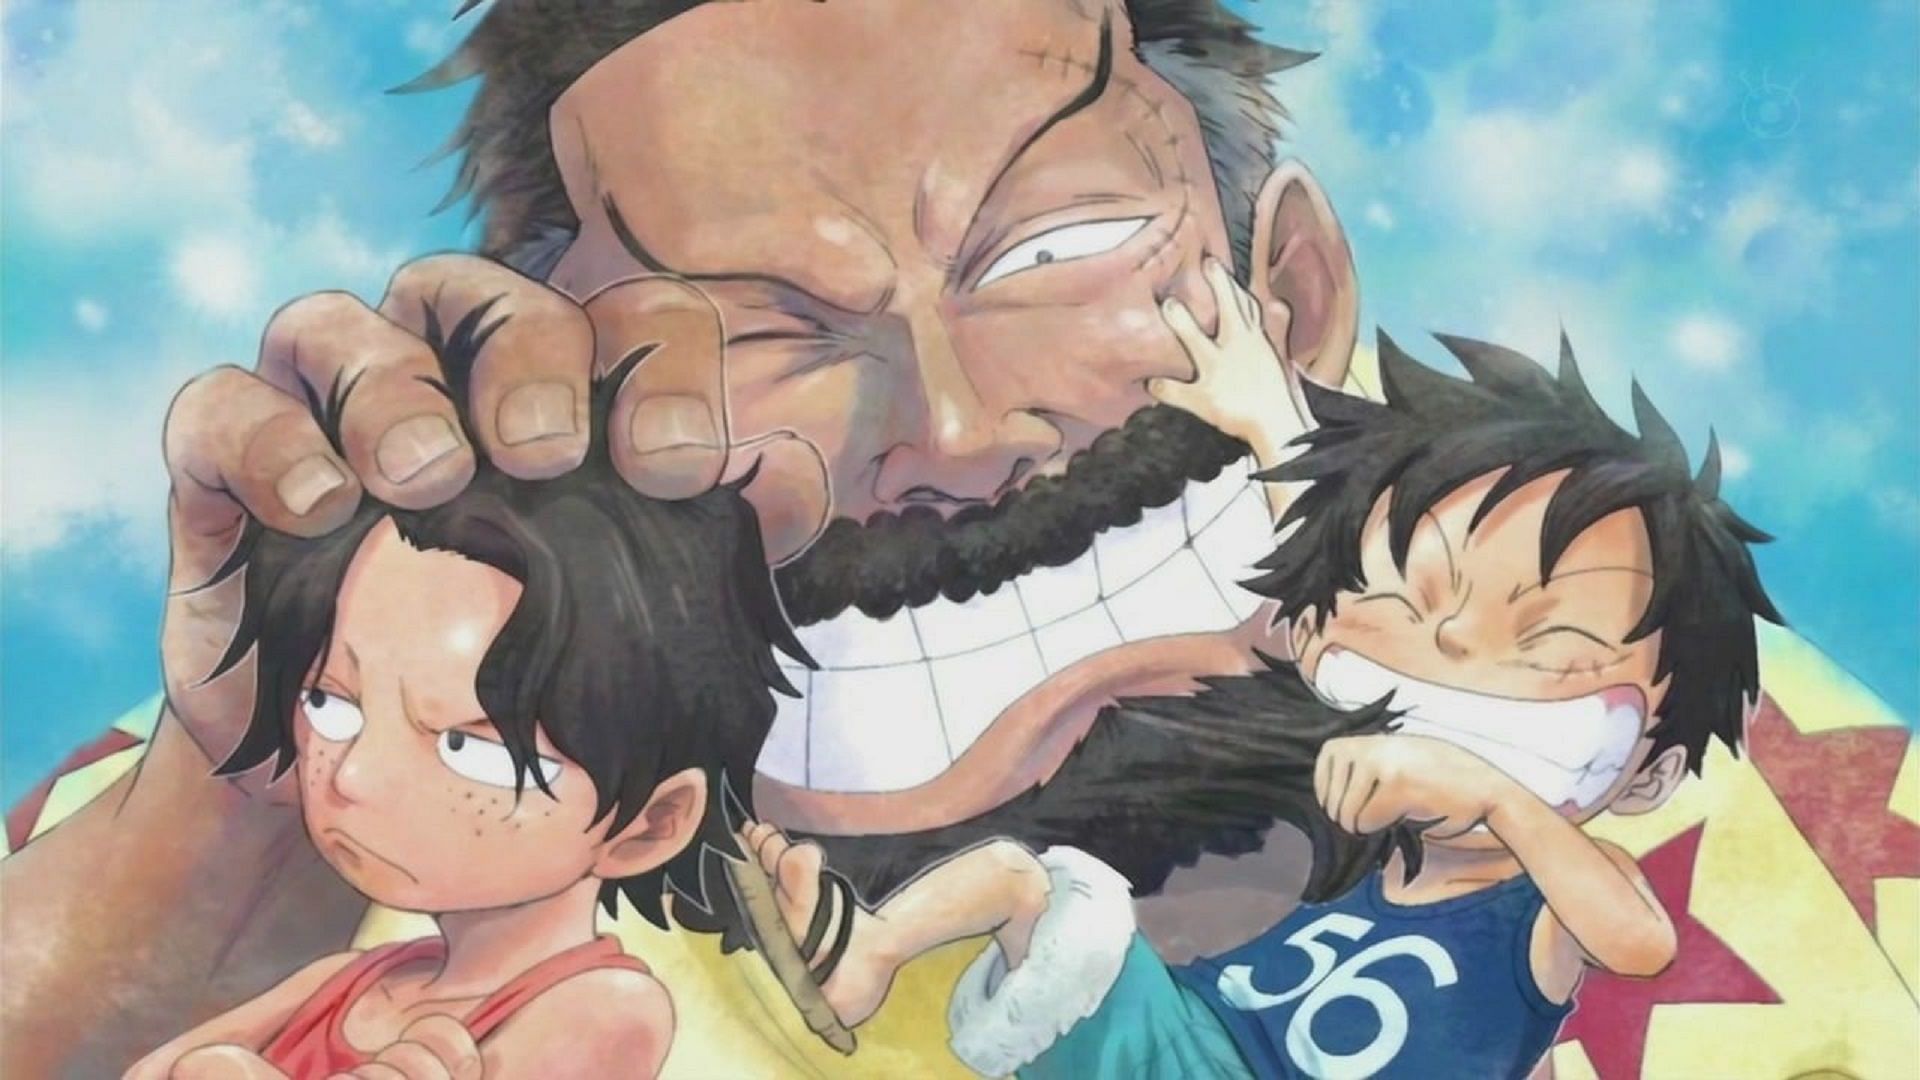 Garp is a very goodhearted person (Image via Toei Animation, One Piece)